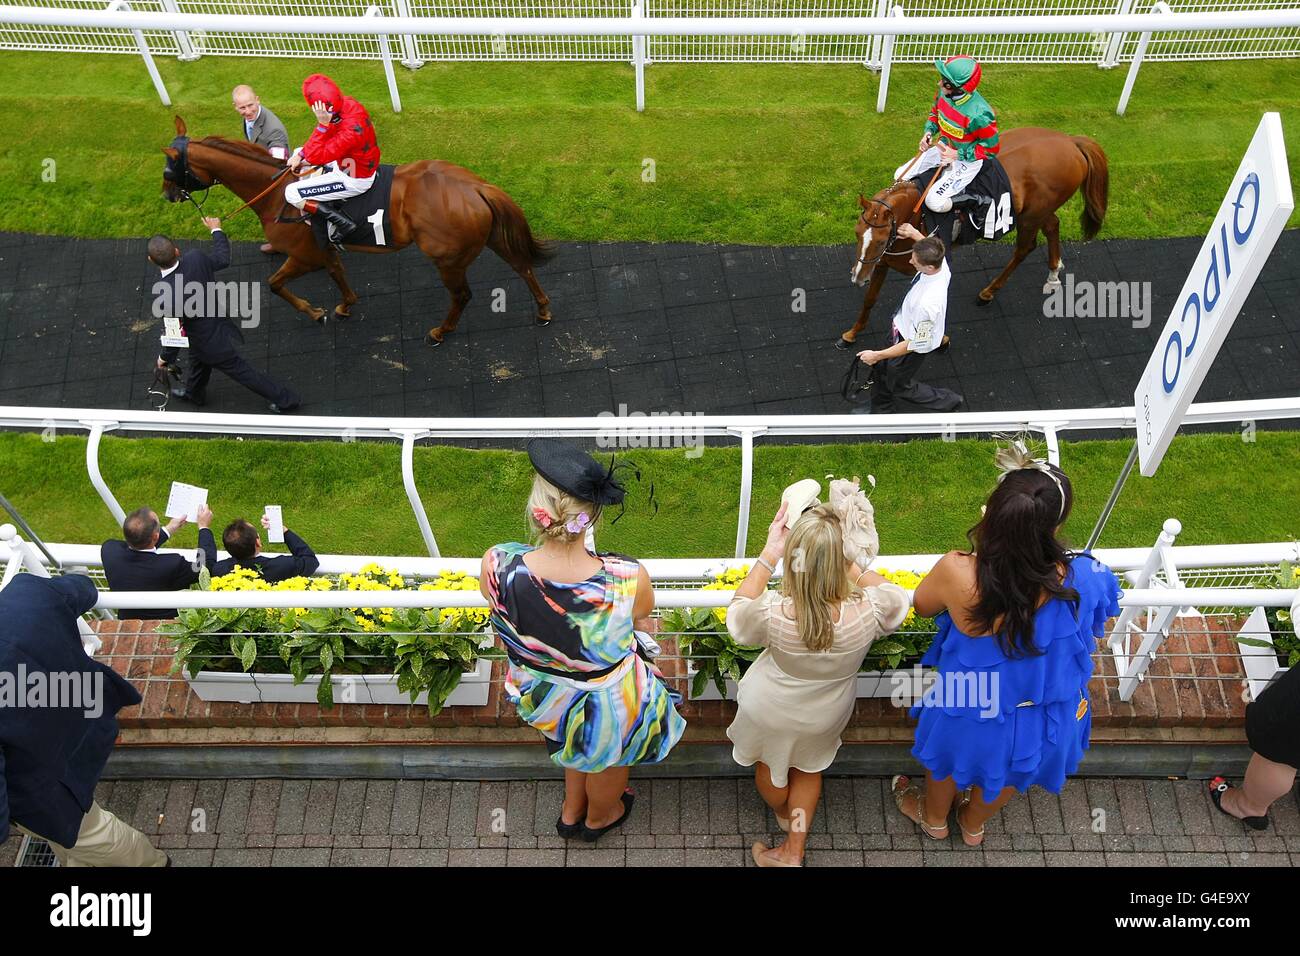 Horse Racing - Glorious Goodwood Festival 2011 - herrliche Sussex Stakes Tag - Goodwood Rennbahn Stockfoto